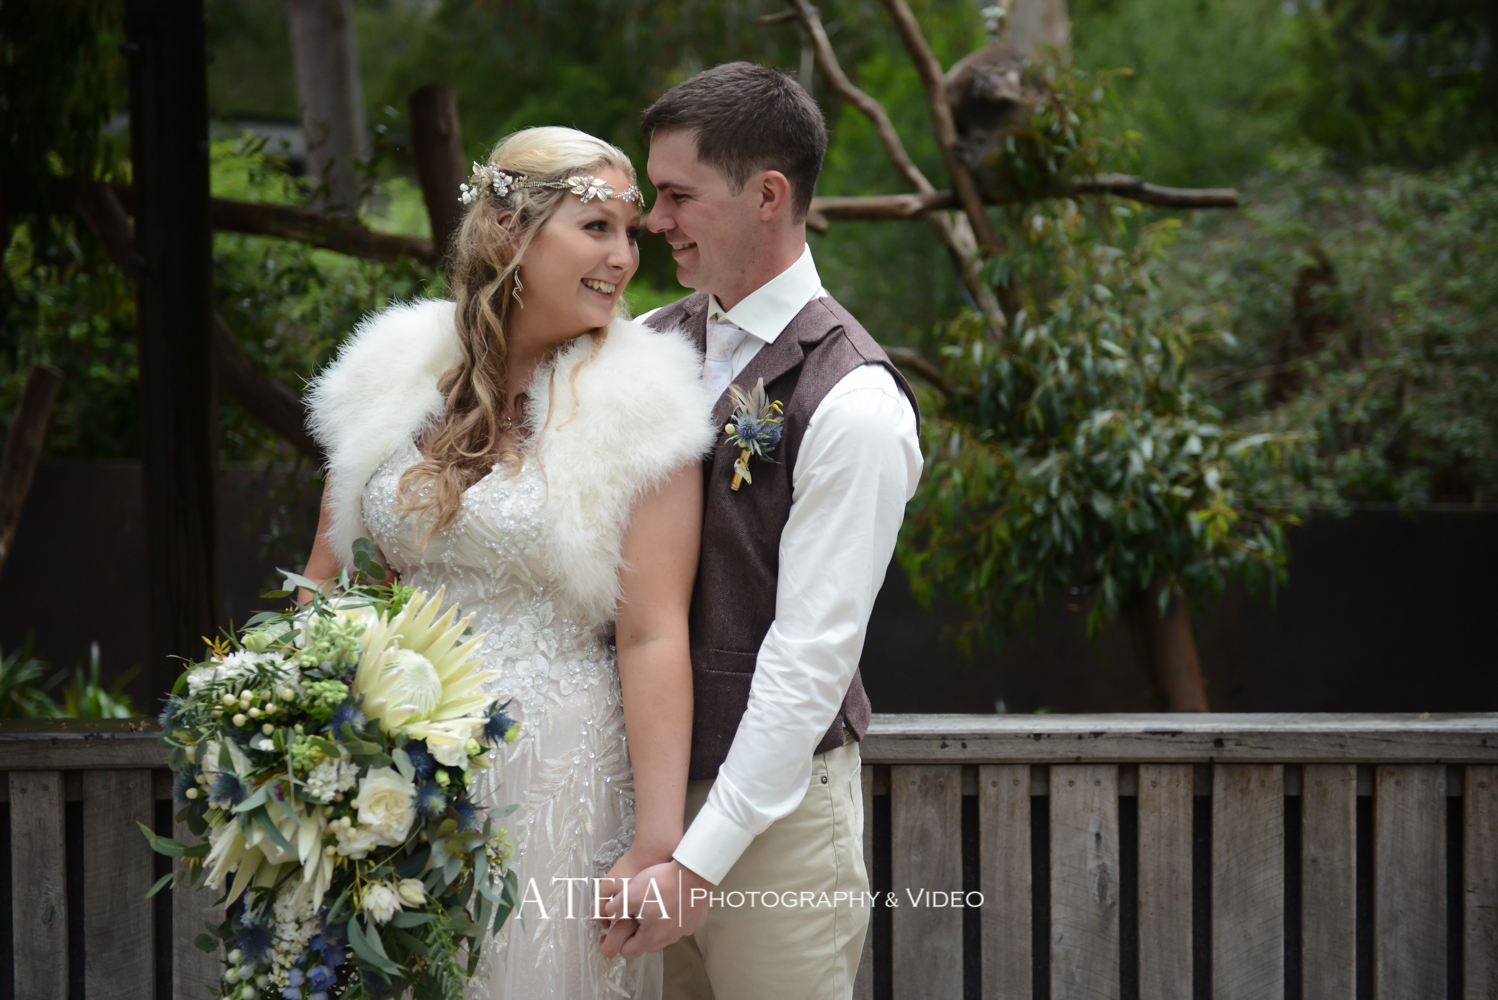 , Healesville Sanctuary Melbourne Wedding Photography by ATEIA Photography